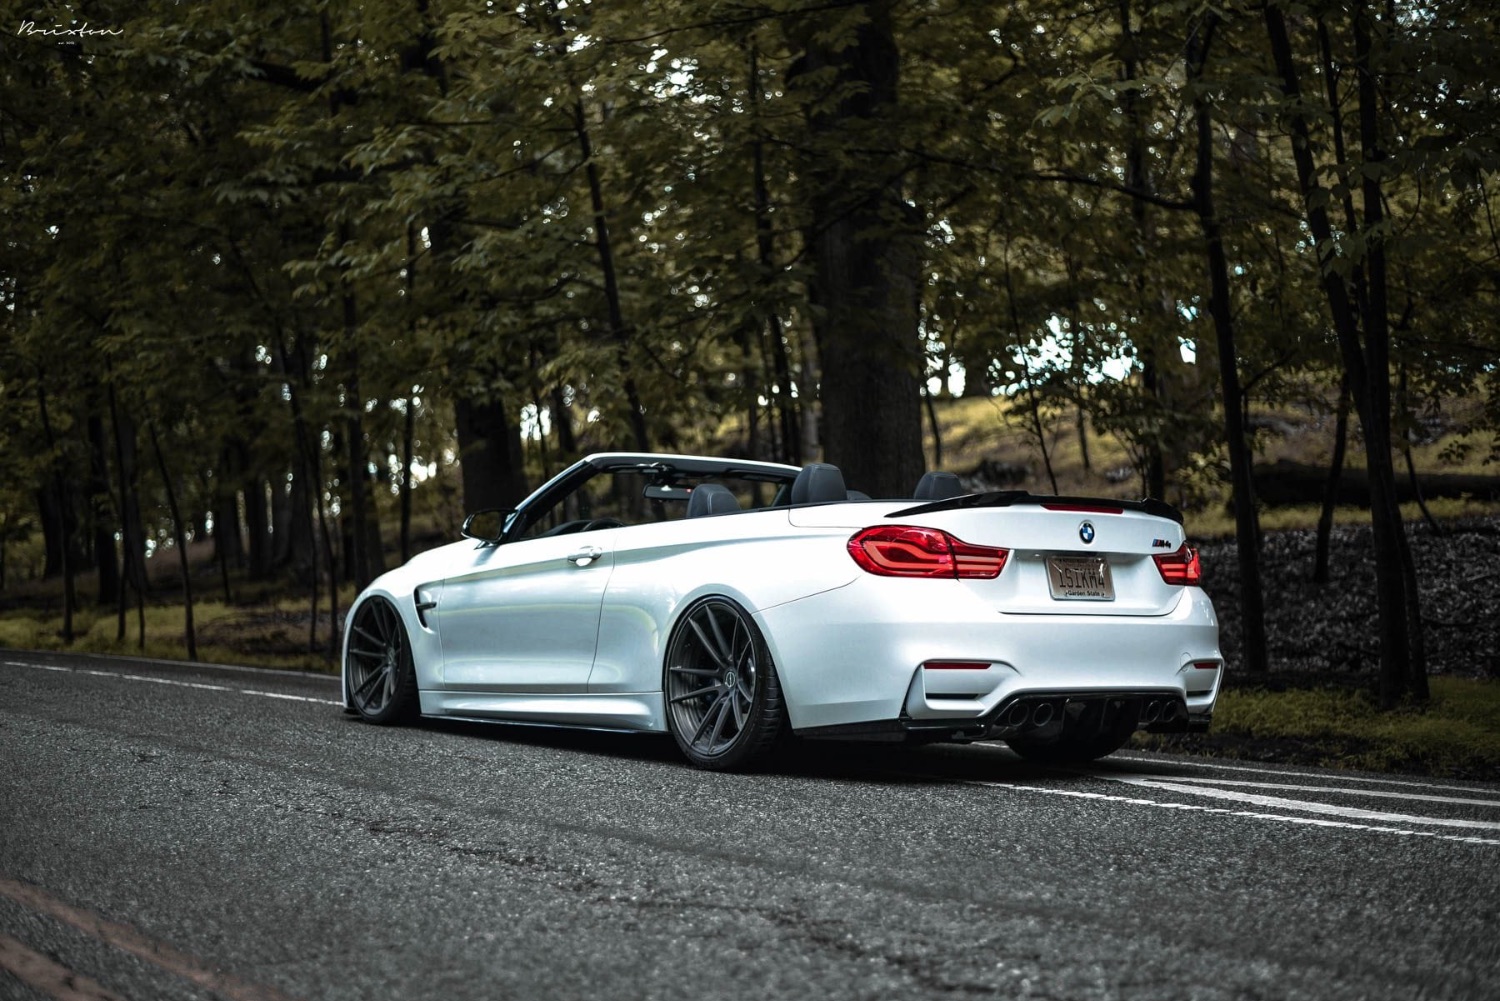 white-bmw-m4-f82-cabriolet-convertible-brixton-forged-m51-duo-series-brushed-smoke-black-concave-wheels-1-1-1800x1202